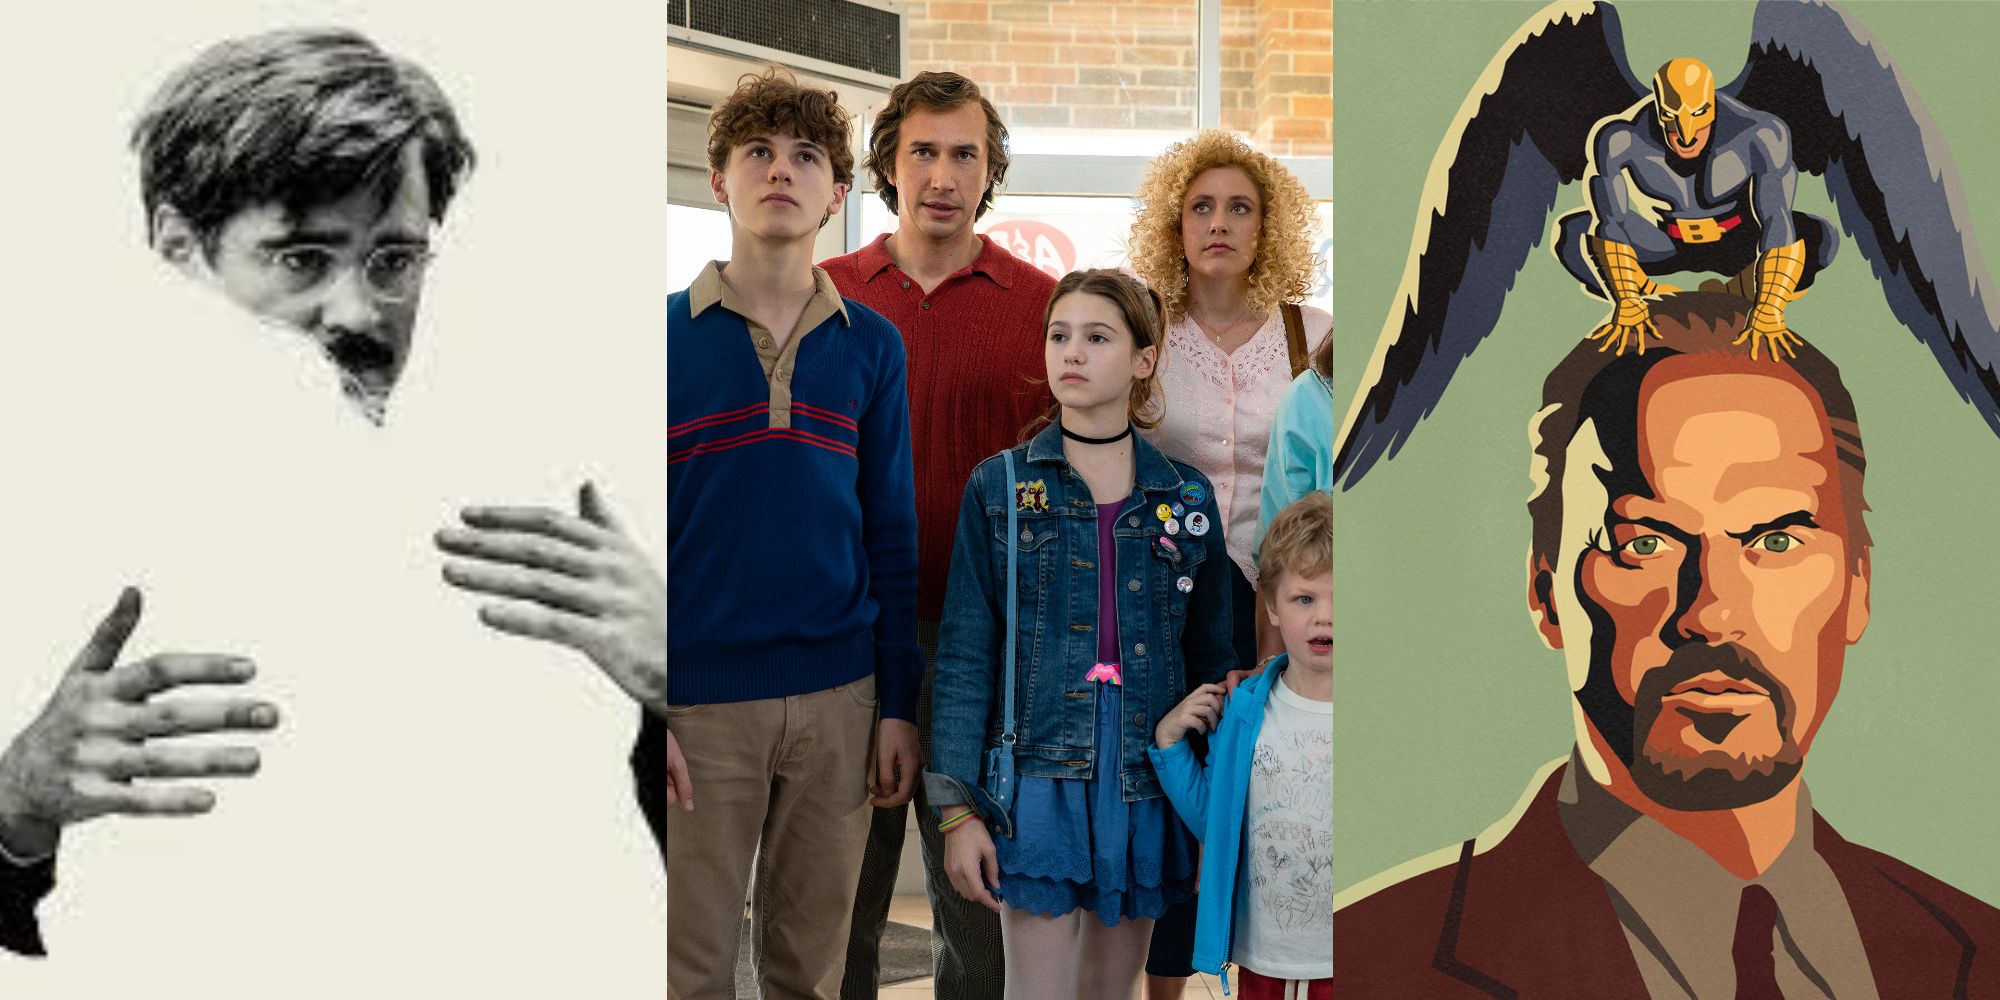 Split image showing characters from The Lobster, White Noise, and Birdman